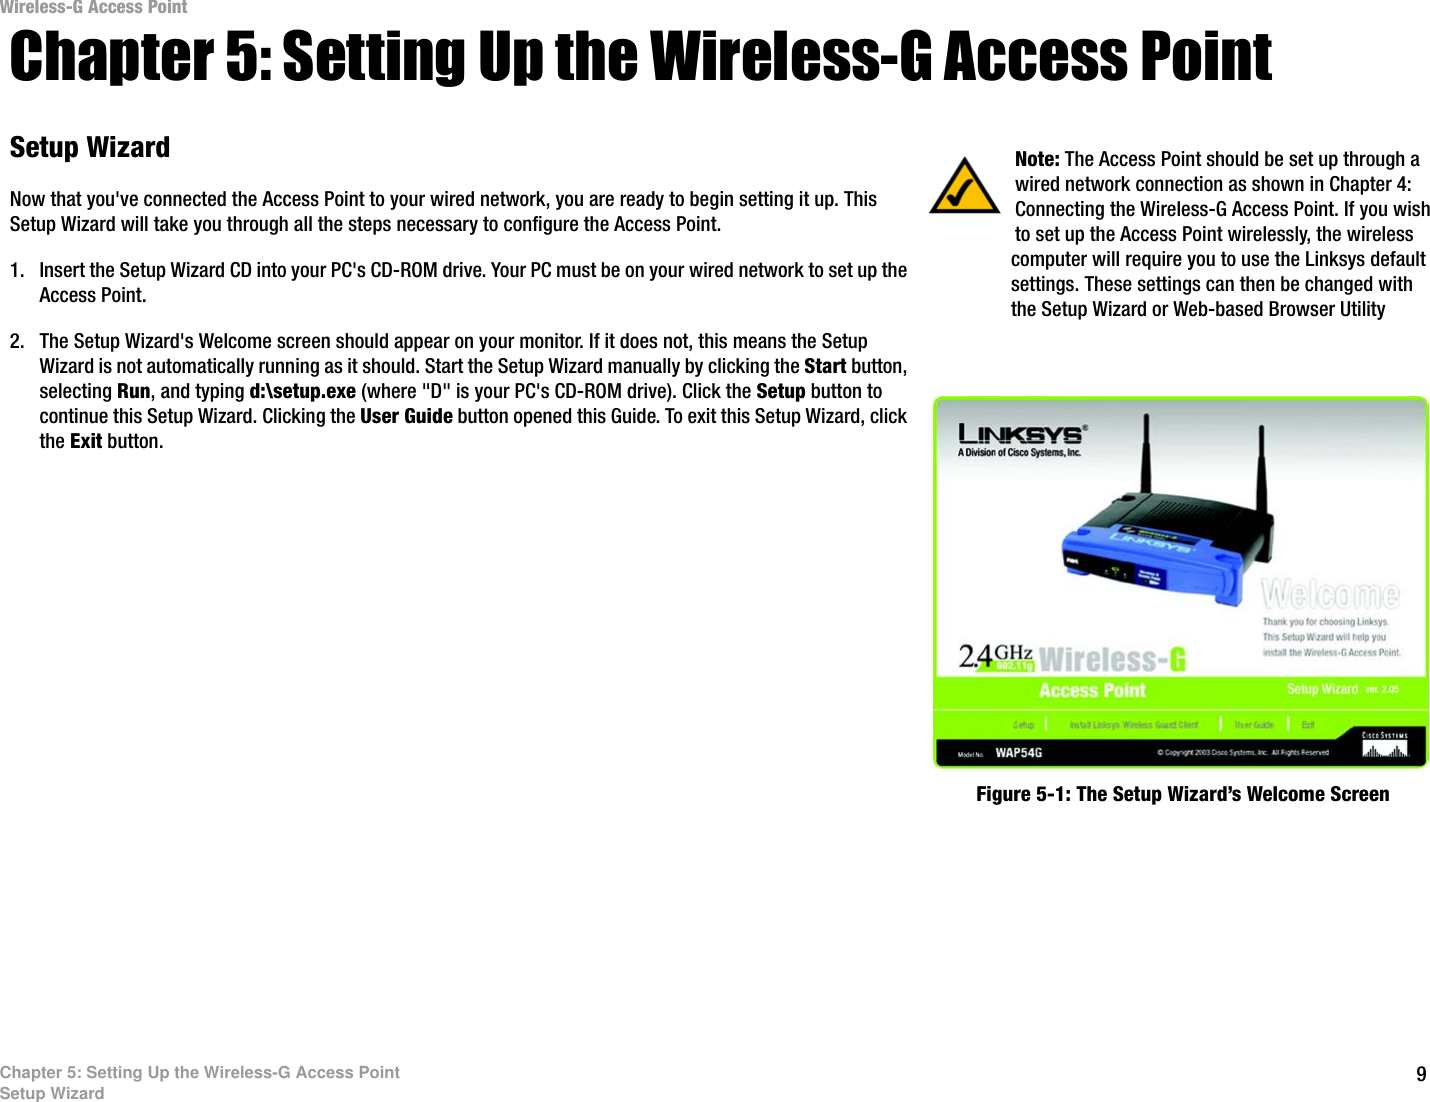 Wireless-G Access Point Chapter 5: Setting Up the Wireless-G Access Point Setup Wizard  Note: The Access Point should be set up through a wired network connection as shown in Chapter 4: Now that you&apos;ve connected the Access Point to your wired network, you are ready to begin setting it up. This  Connecting the Wireless-G Access Point. If you wish Setup Wizard will take you through all the steps necessary to configure the Access Point.  to set up the Access Point wirelessly, the wireless 1.  Insert the Setup Wizard CD into your PC&apos;s CD-ROM drive. Your PC must be on your wired network to set up the  computer will require you to use the Linksys default Access Point.  settings. These settings can then be changed with the Setup Wizard or Web-based Browser Utility 2.  The Setup Wizard&apos;s Welcome screen should appear on your monitor. If it does not, this means the Setup  Wizard is not automatically running as it should. Start the Setup Wizard manually by clicking the Start button,  selecting Run, and typing d:\setup.exe (where &quot;D&quot; is your PC&apos;s CD-ROM drive). Click the Setup button to  continue this Setup Wizard. Clicking the User Guide button opened this Guide. To exit this Setup Wizard, click  the Exit button. Figure 5-1: The Setup Wizard’s Welcome Screen Chapter 5: Setting Up the Wireless-G Access Point Setup Wizard  9 